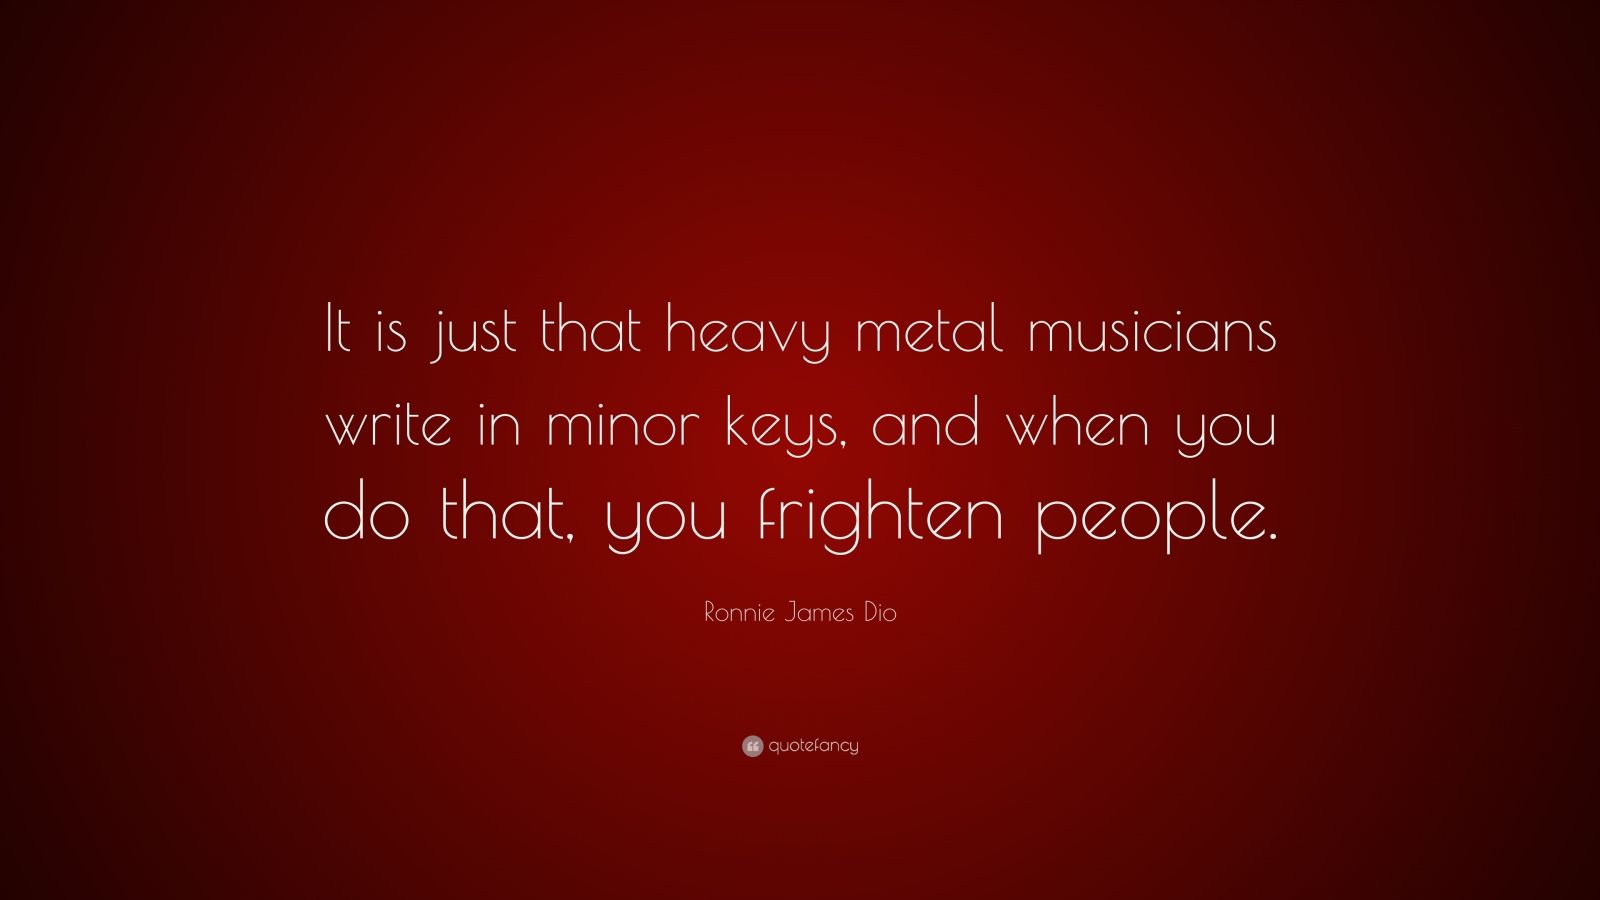 Ronnie James Dio Quote: “It is just that heavy metal musicians write in ...